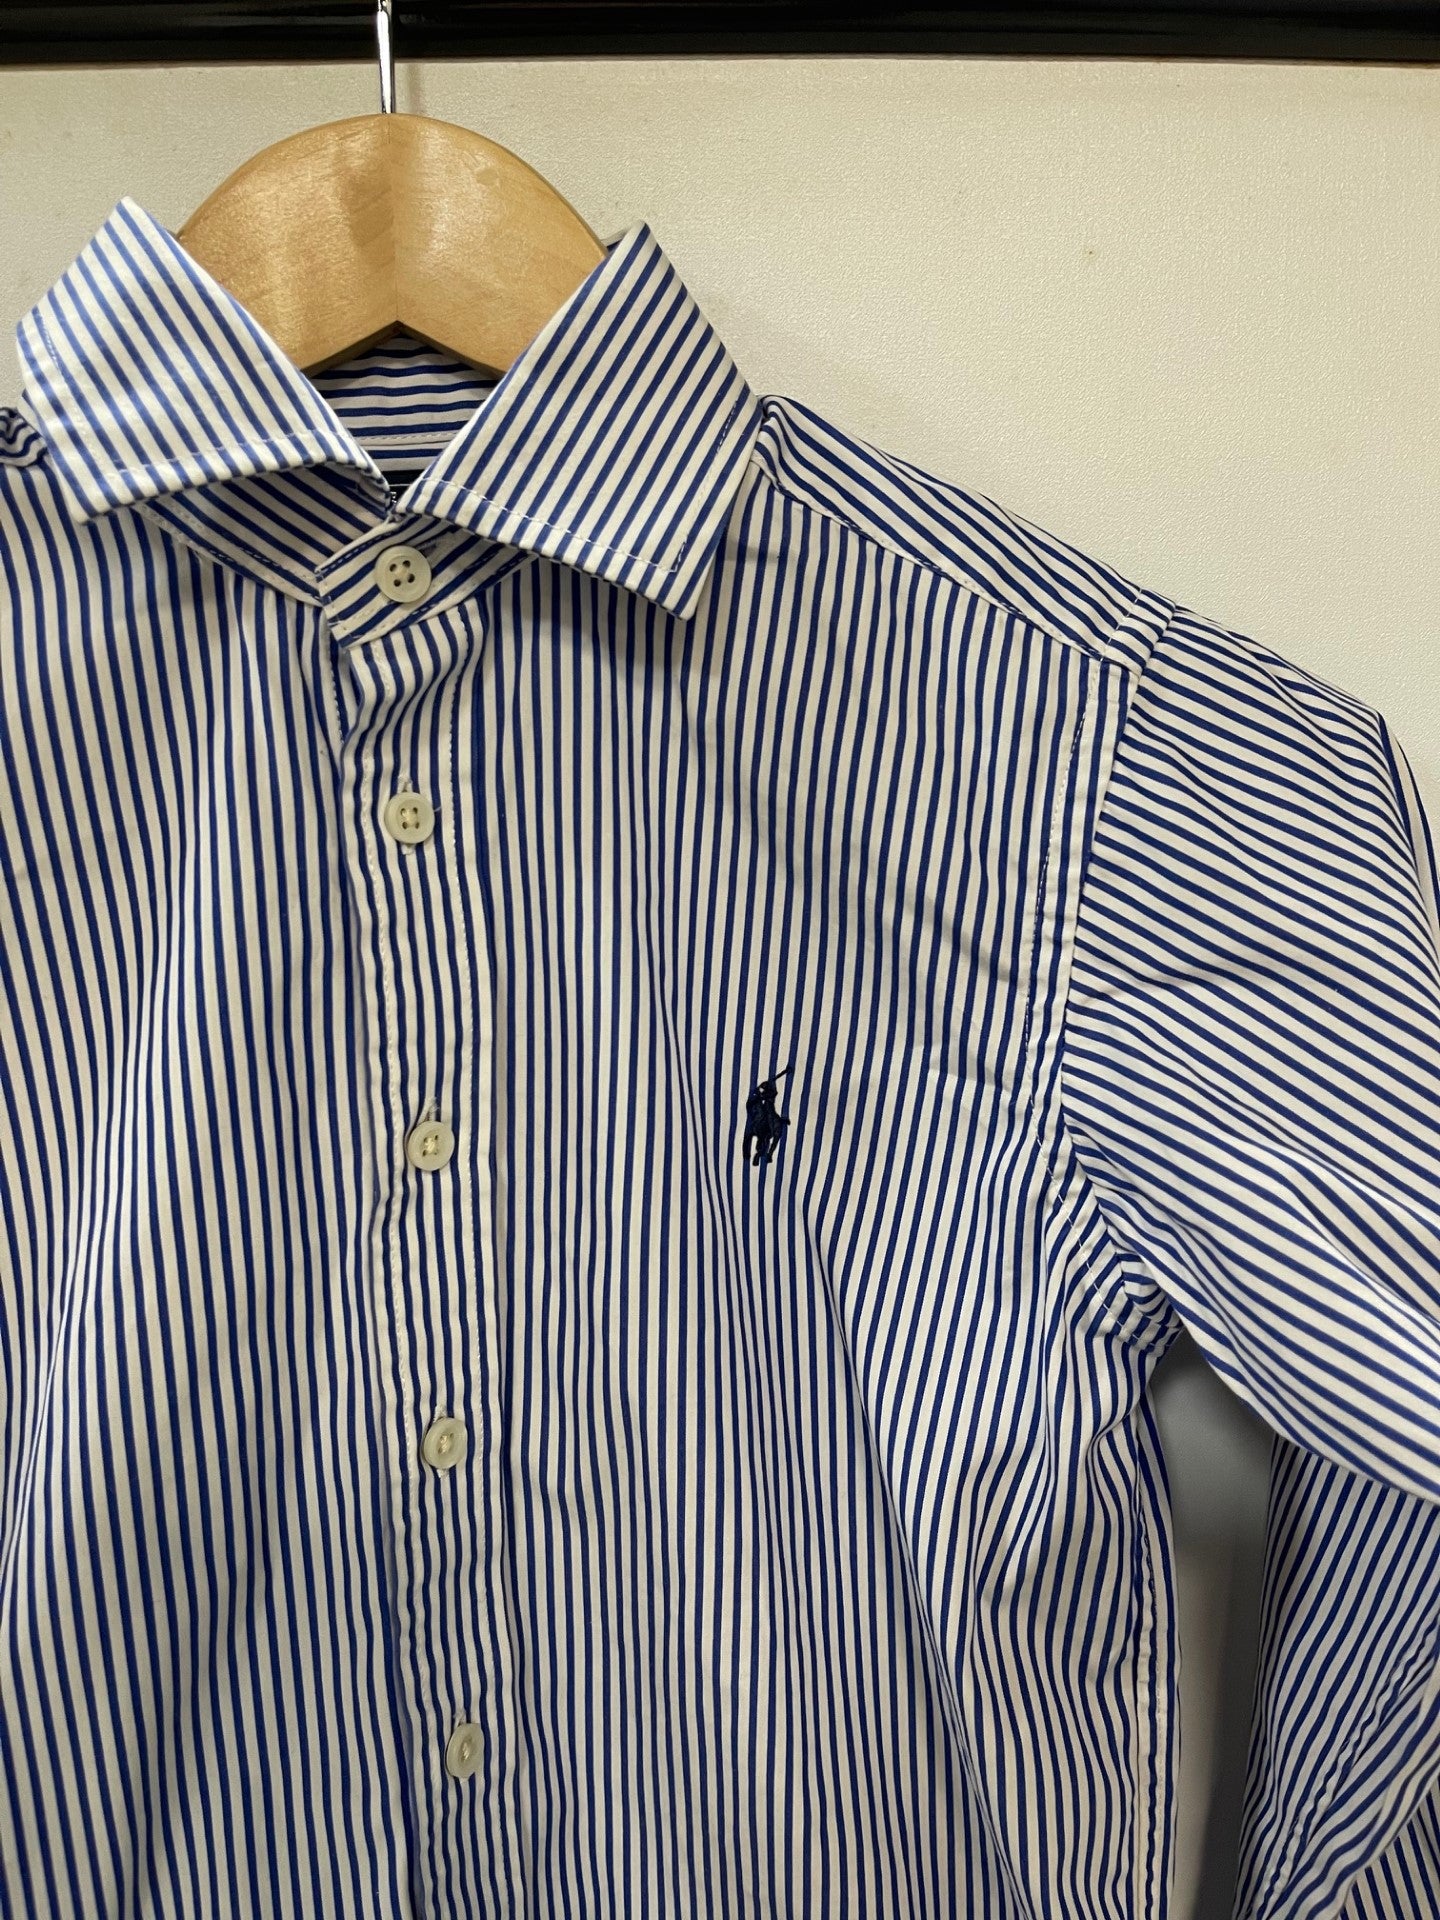 Polo Ralph Lauren Blue and White Top Size 8